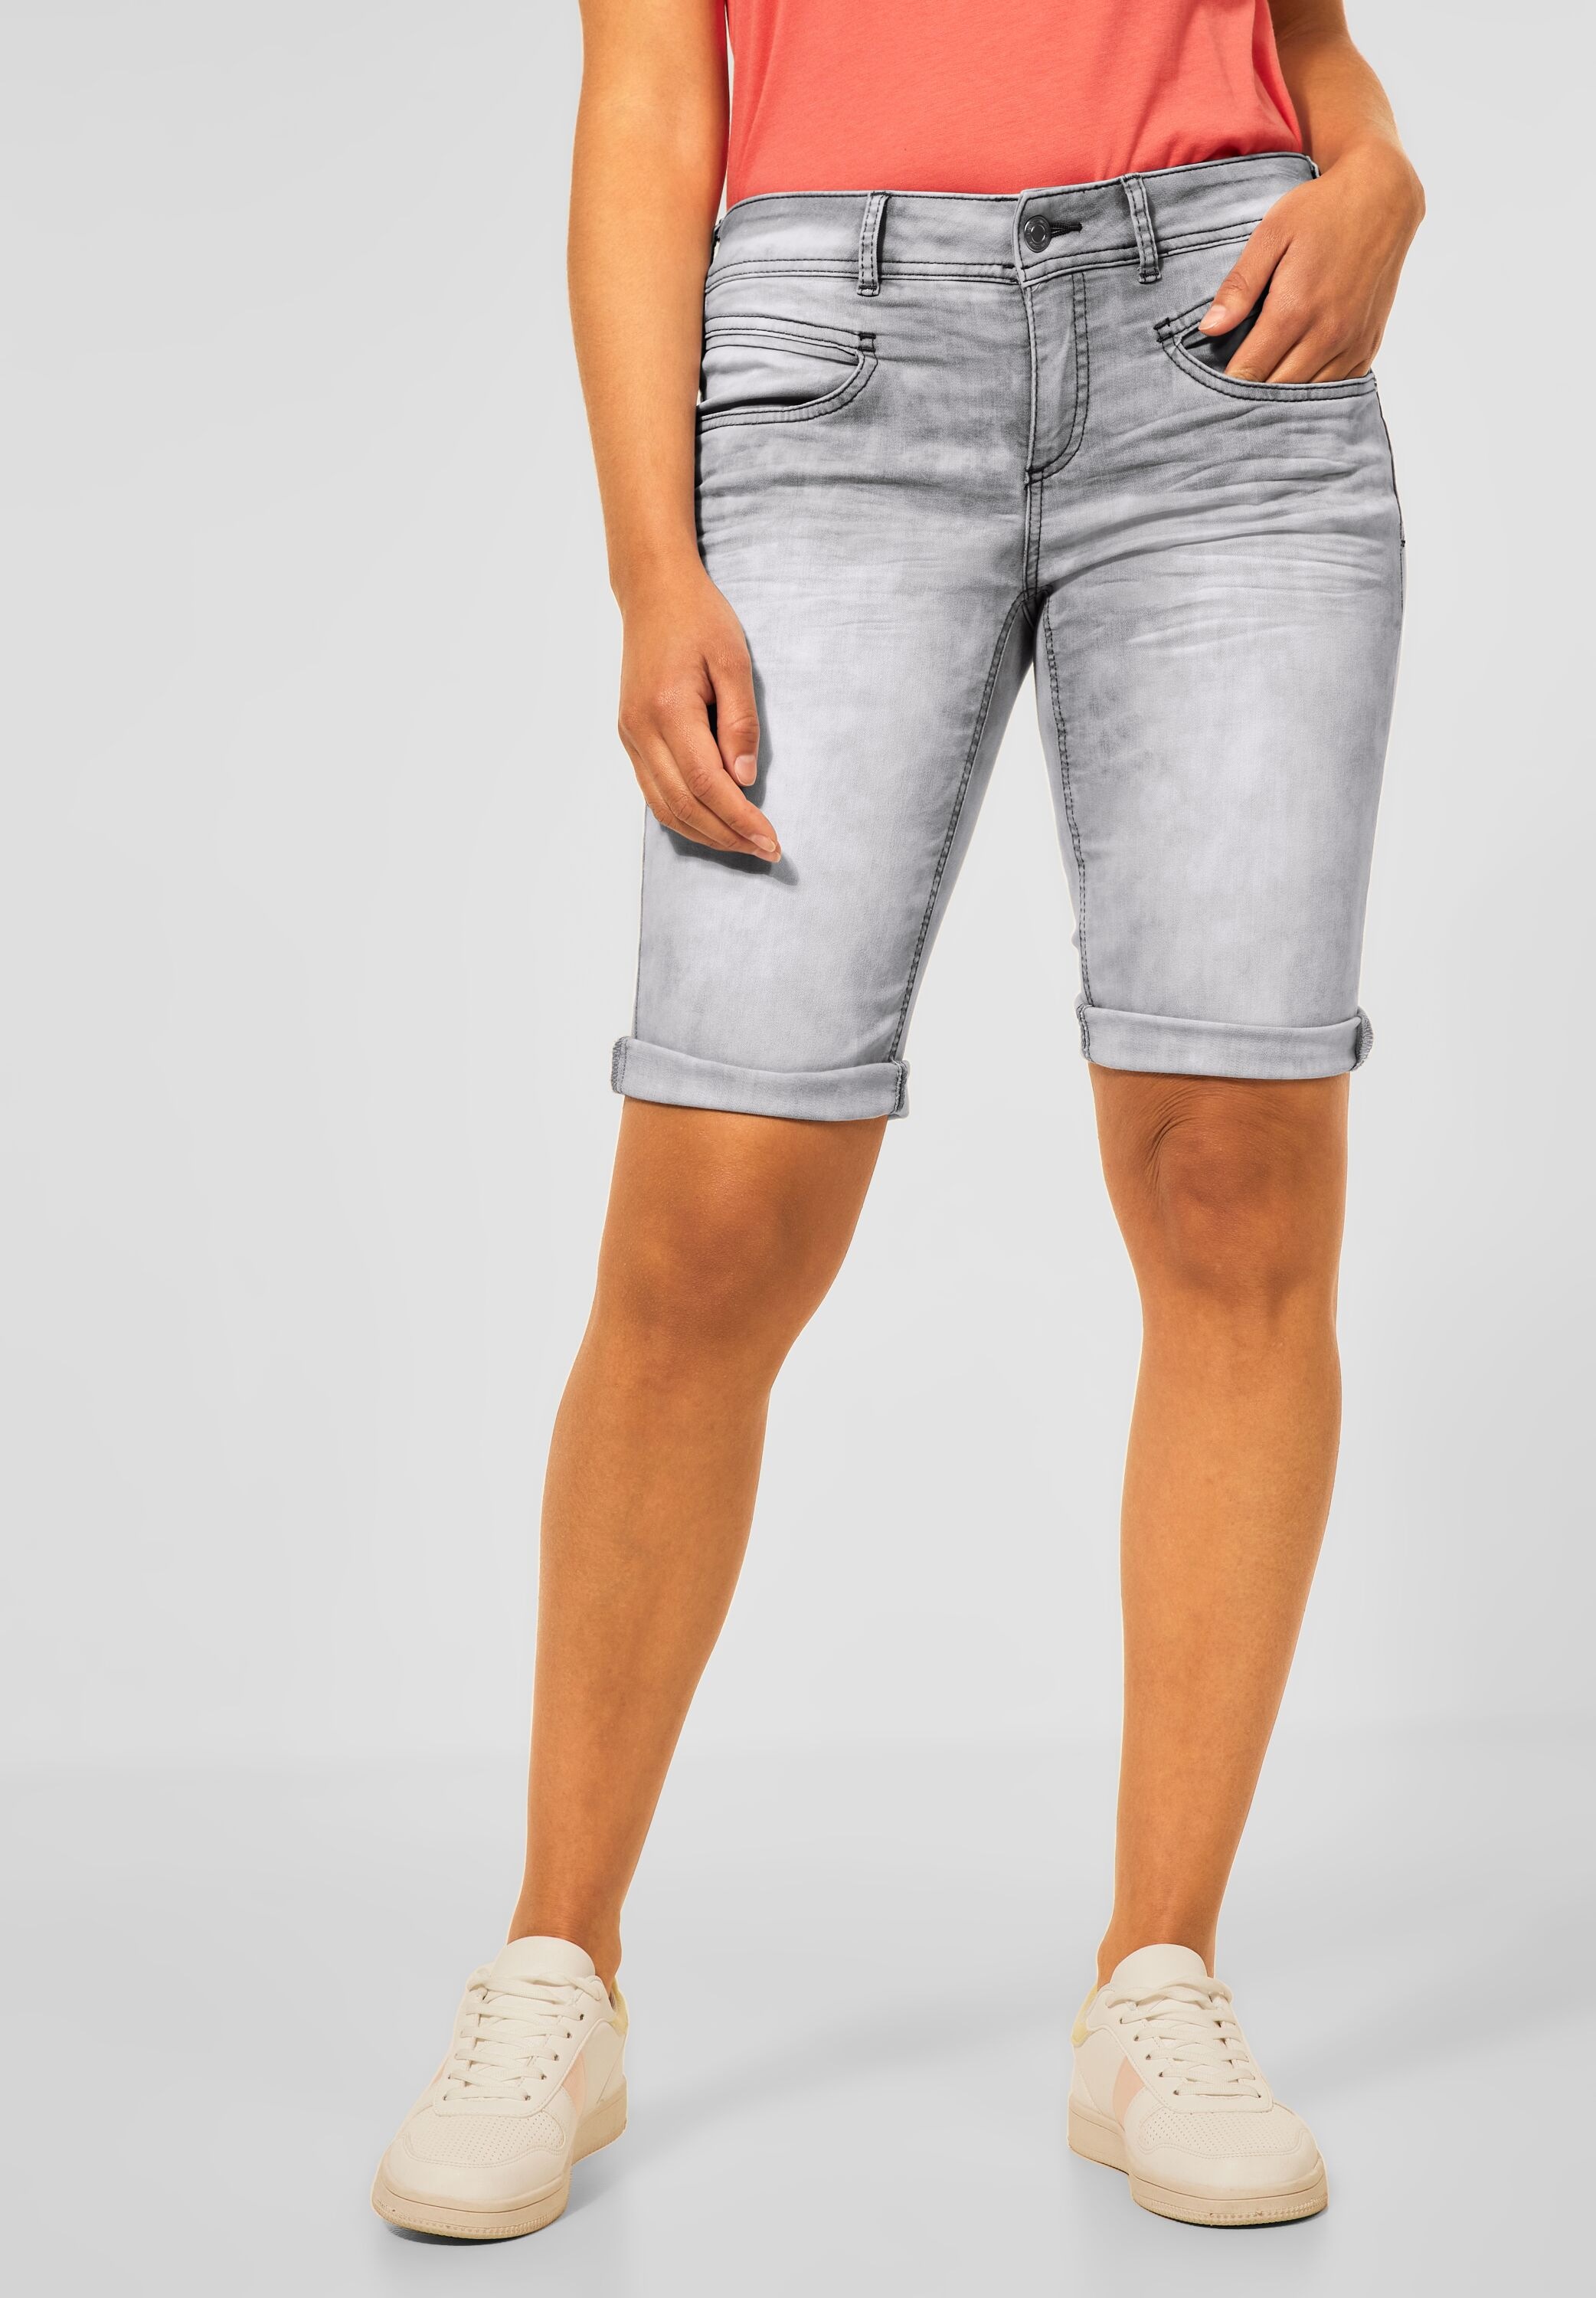 STREET ONE Comfort-fit-Jeans, 4-Pocket Style